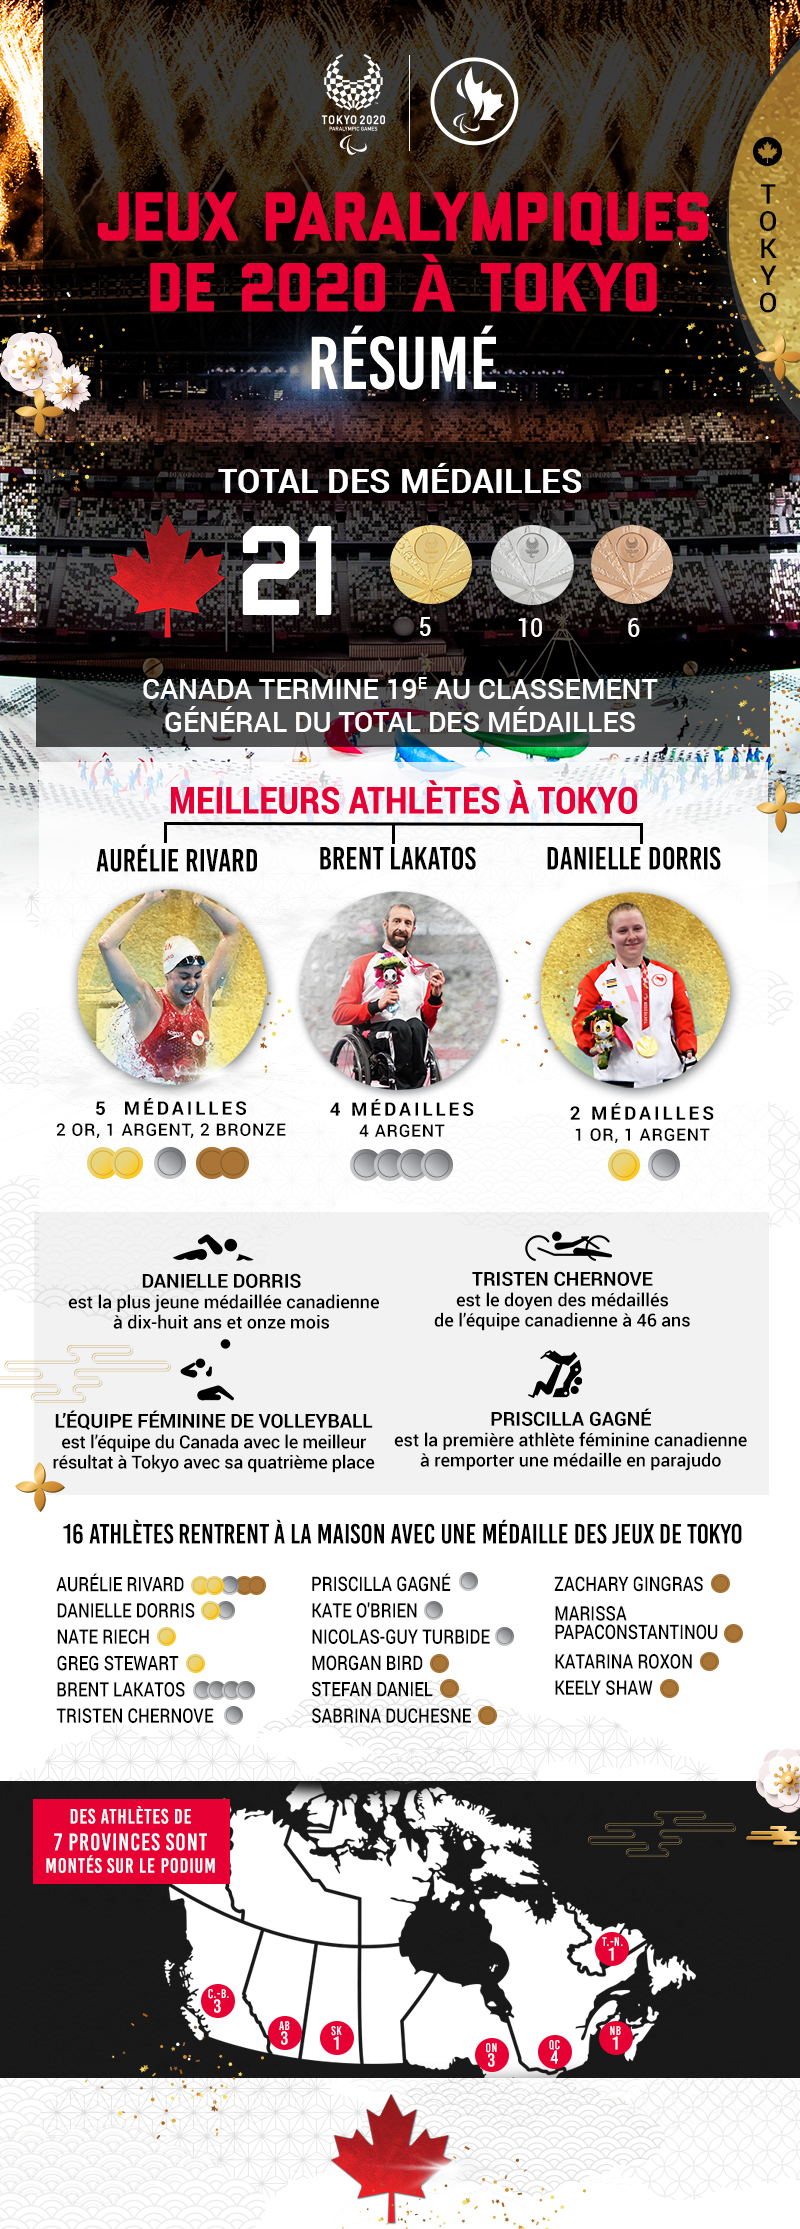 The article above with supporting images ie: of athletes with medals 